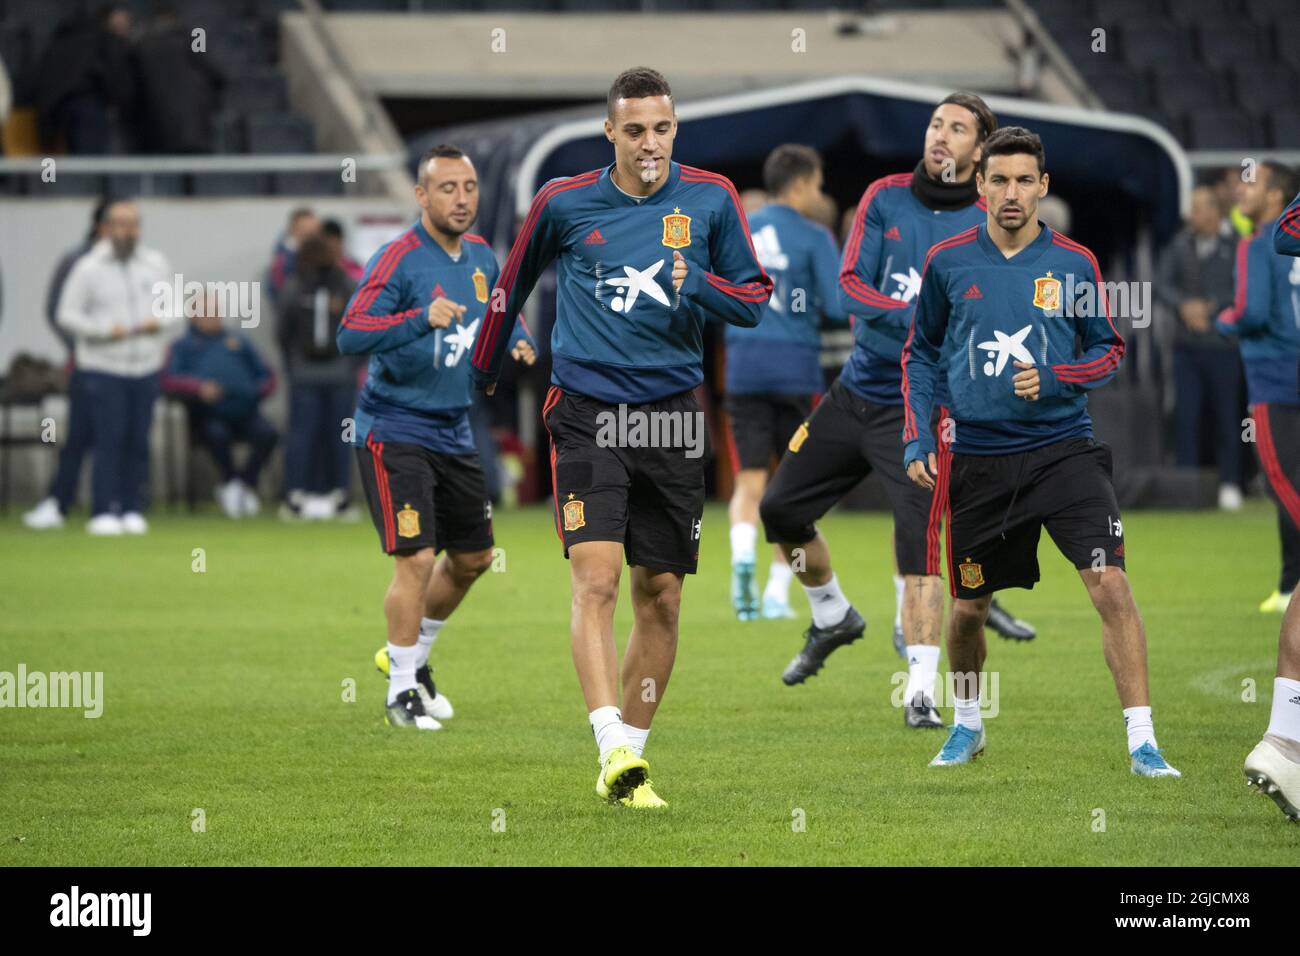 Spain's national soccer player Rodrigo Moreno Machado (front L) attends a training session at Friens Arena in Solna, Stockholm, Sweden, on Oct. 14, 2019, on the eve of the Euro 2020 Group F qualification soccer match between Sweden and Spain. Photo: Jessica Gow / TT / code 10070  Stock Photo